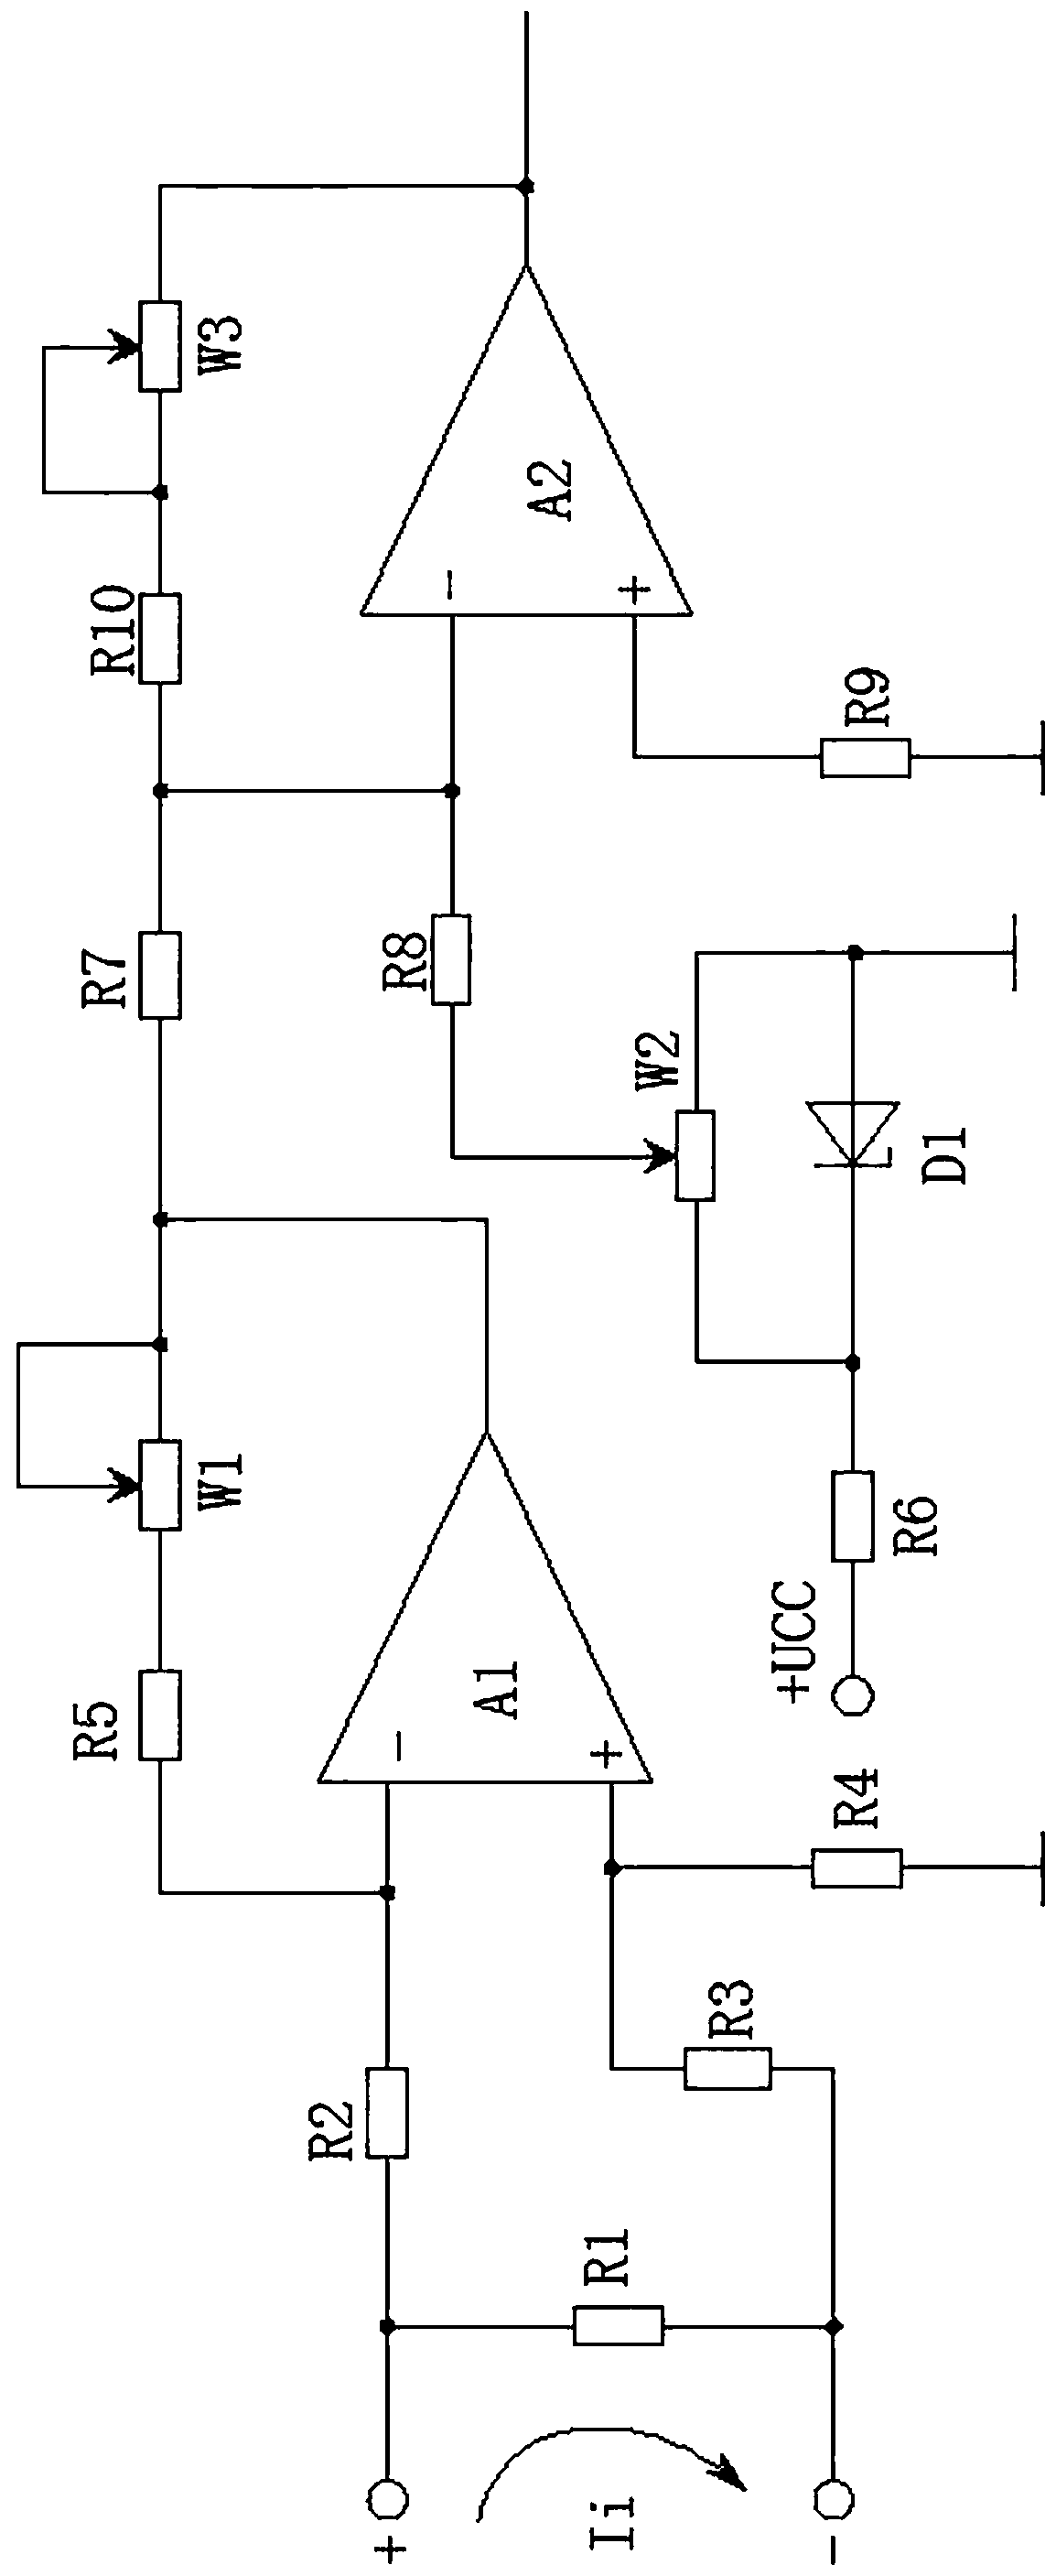 Current-to-voltage conversion circuit applied to commercial concrete production management system